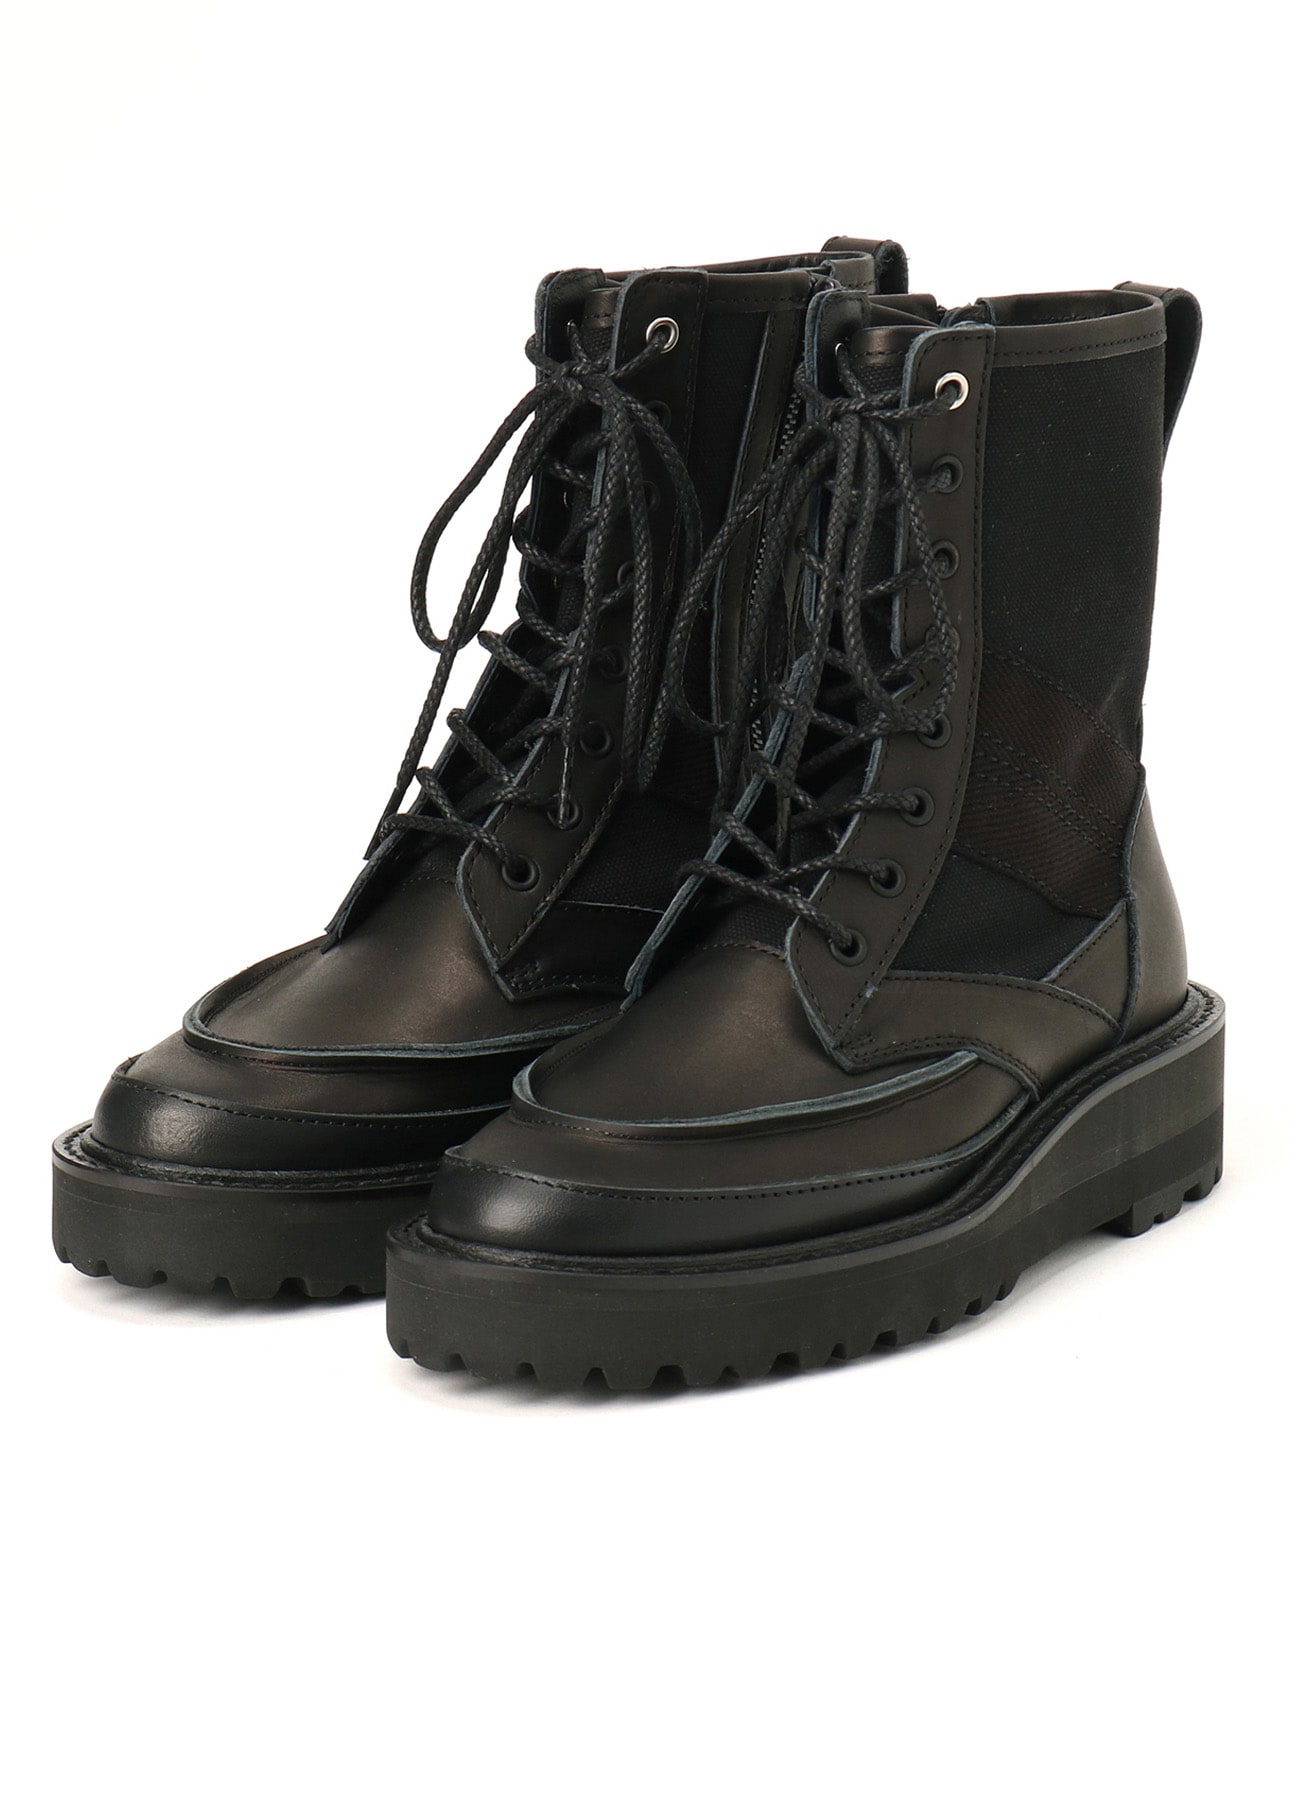 COTTON DUCK/LEATHER COMBINATION MILITARY BOOTS(22.5 